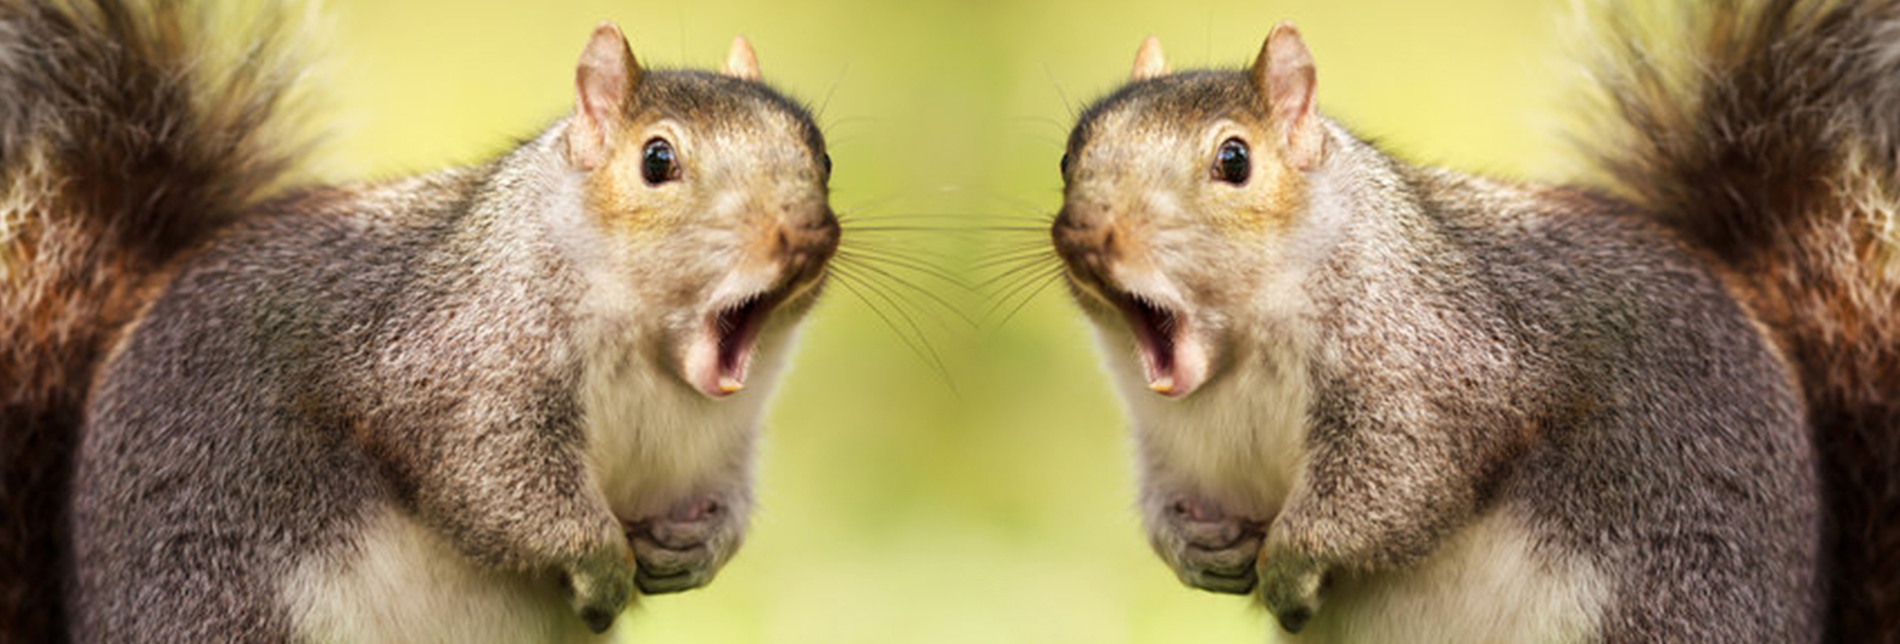 Two squirrels with mouths open